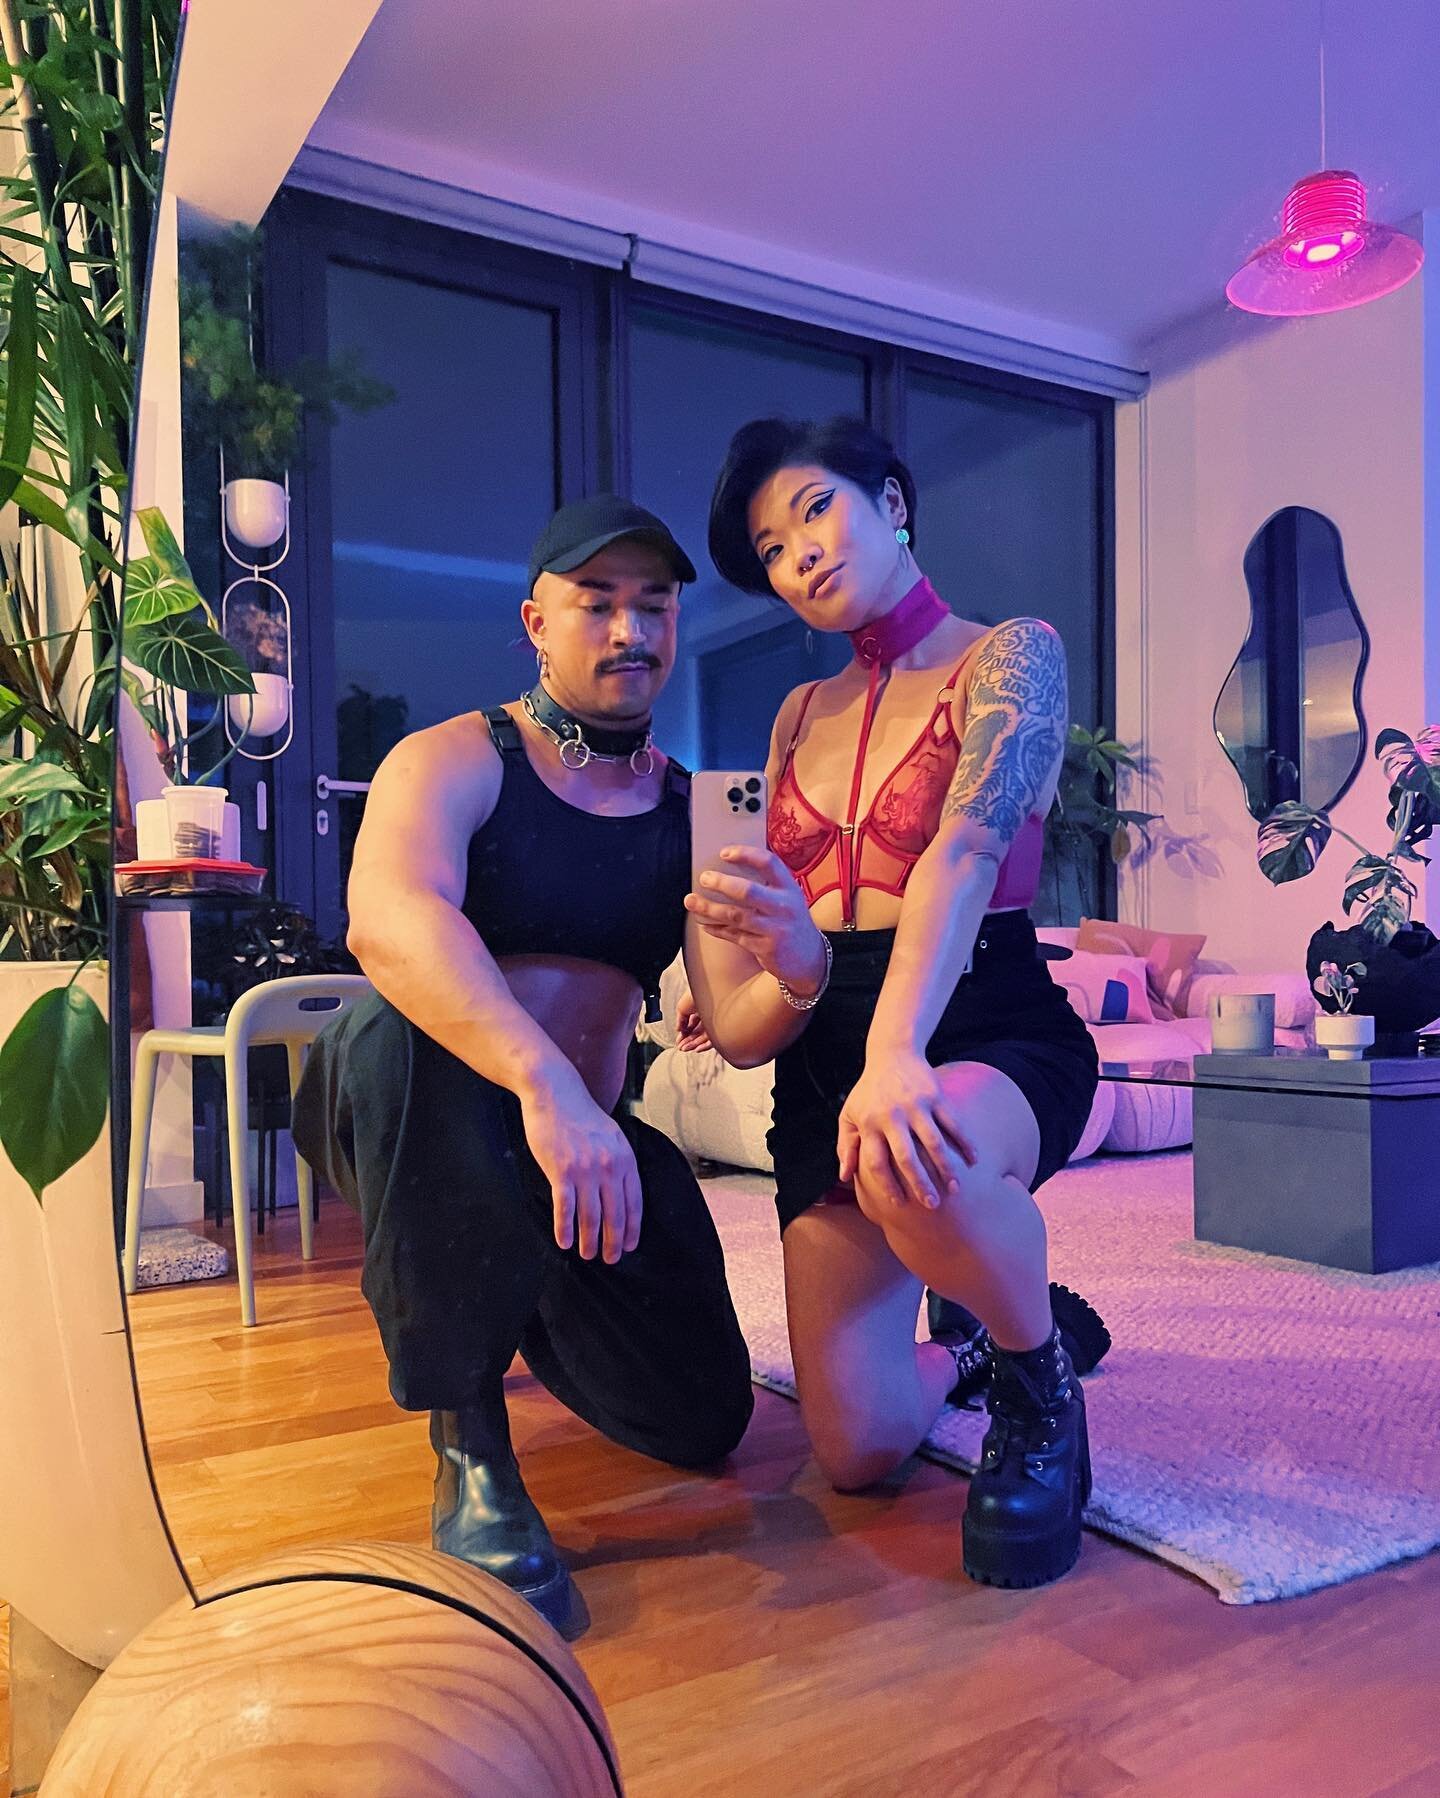 Nine years older, wiser, and spicier 🌶️ What a gift to be aging gracefully alongside friends like @davidvillouta 🥹

[Image descriptions: 1. A mirror selfie of Lauren and David dressed in crop tops and black boots in a plant-filled apartment at nigh